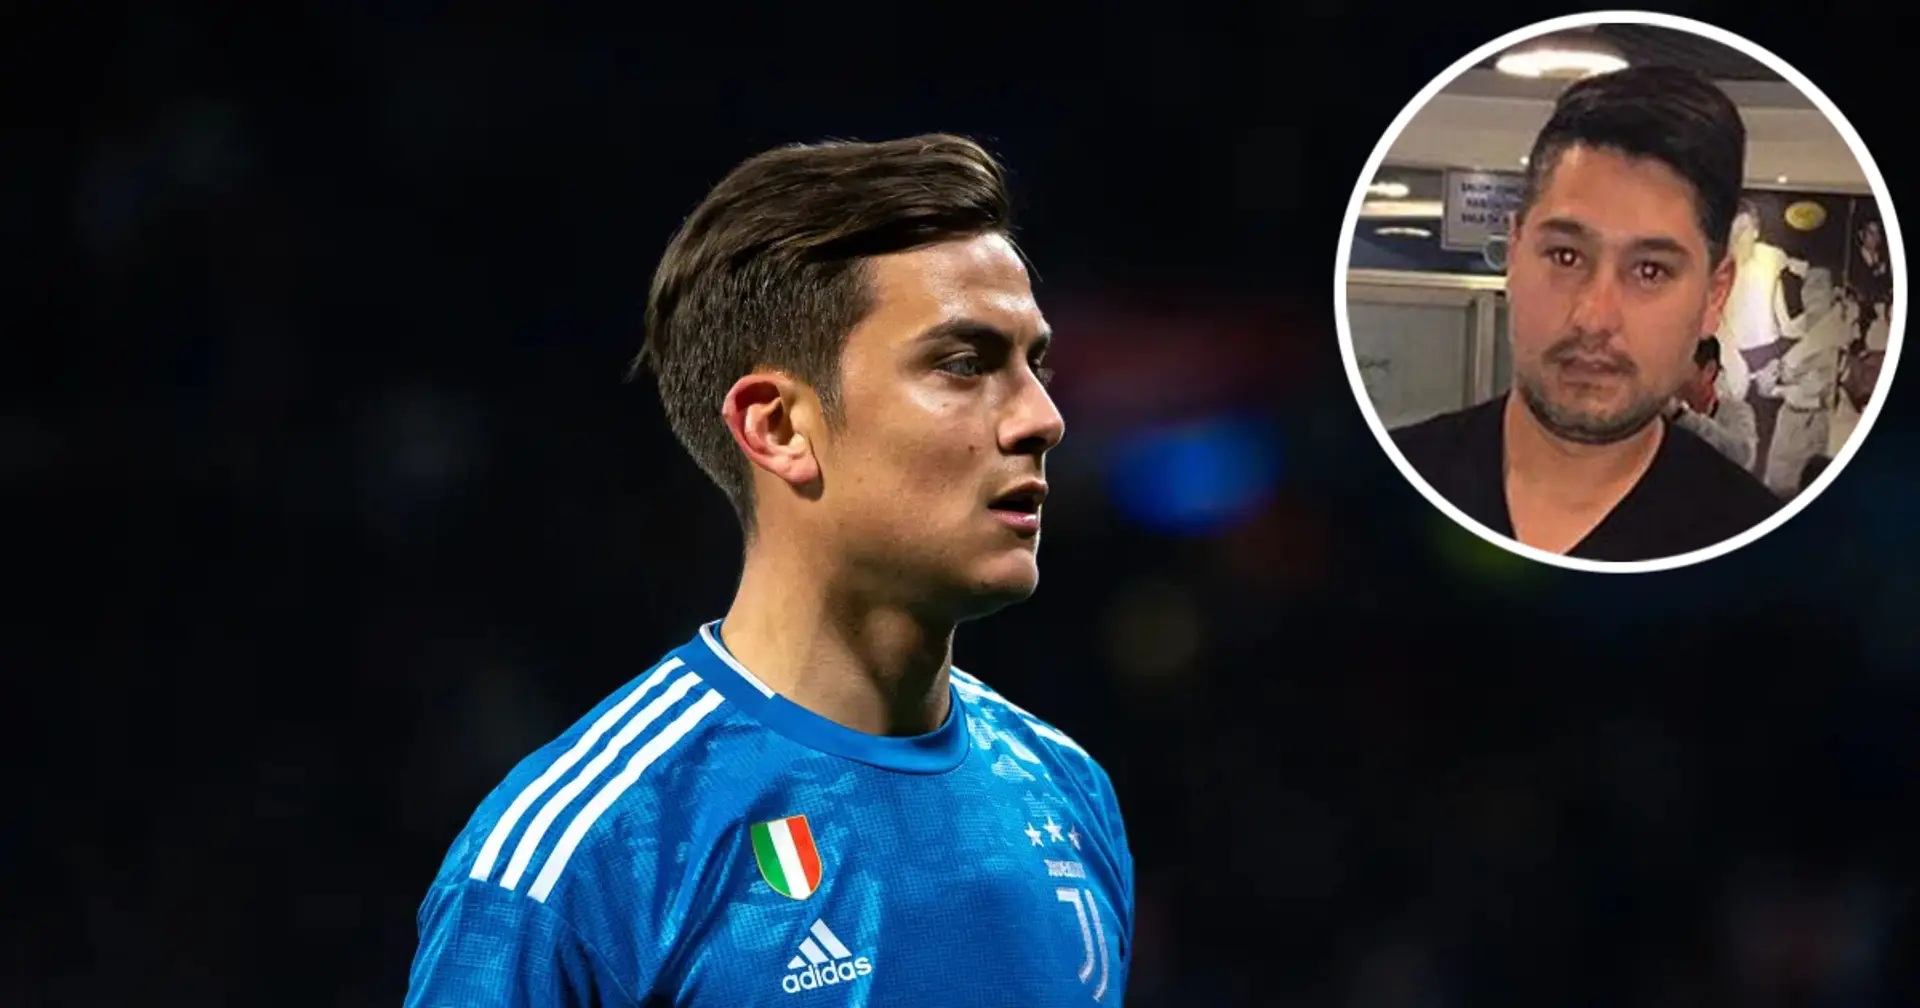 Paulo Dybala was 'one step away' from joining Man United, agent confirms